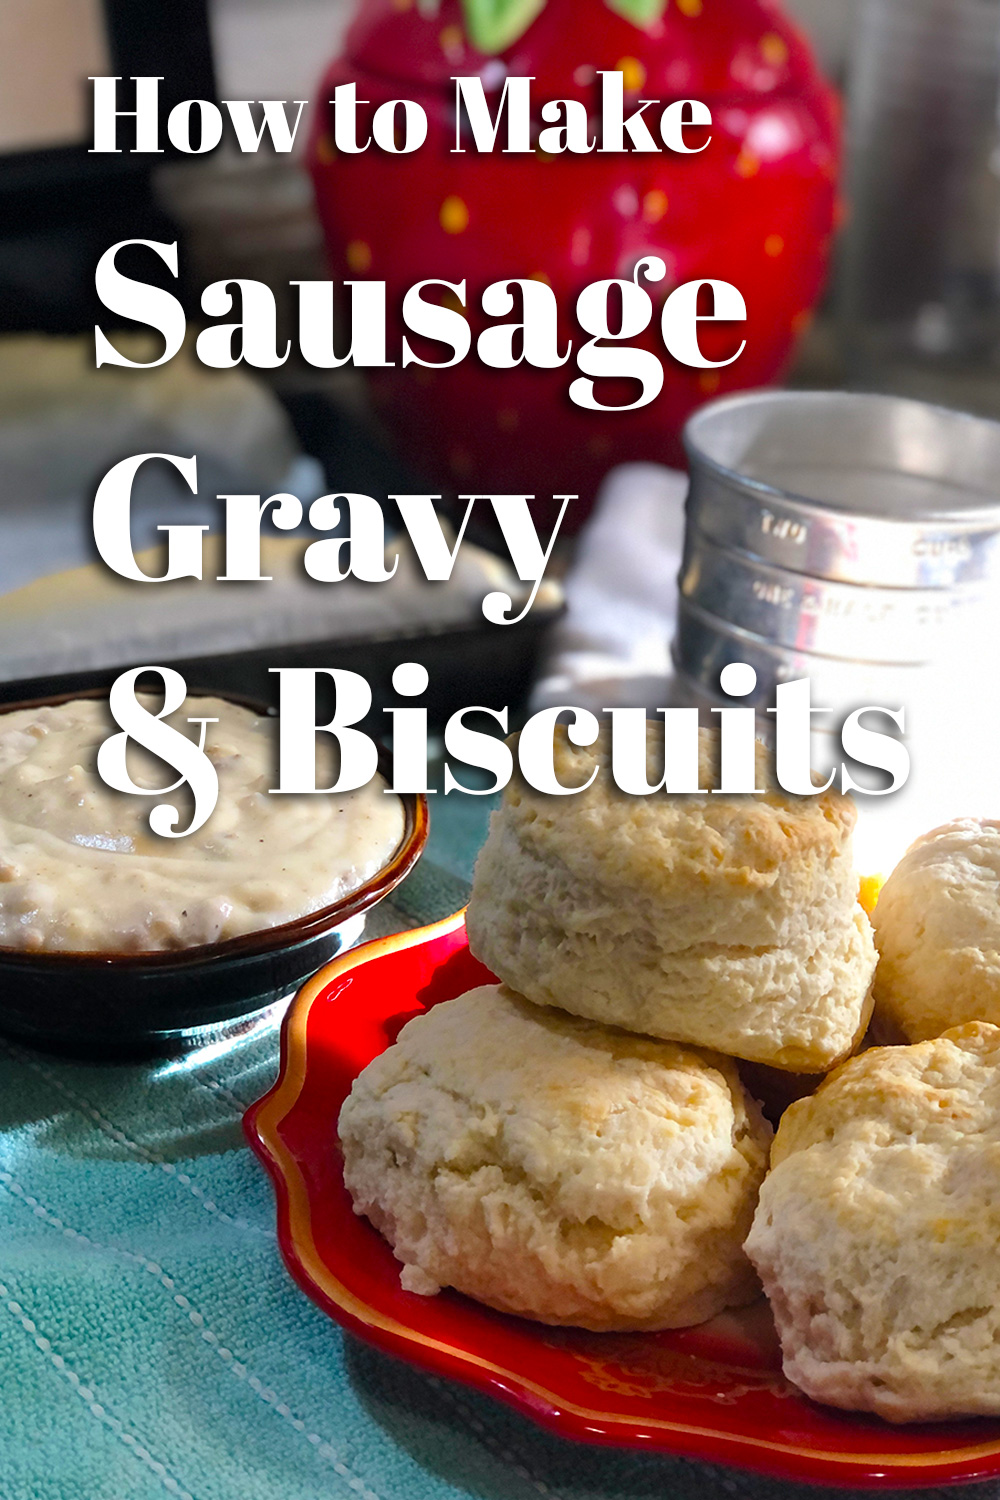 How to Make Sausage Gravy & Biscuits